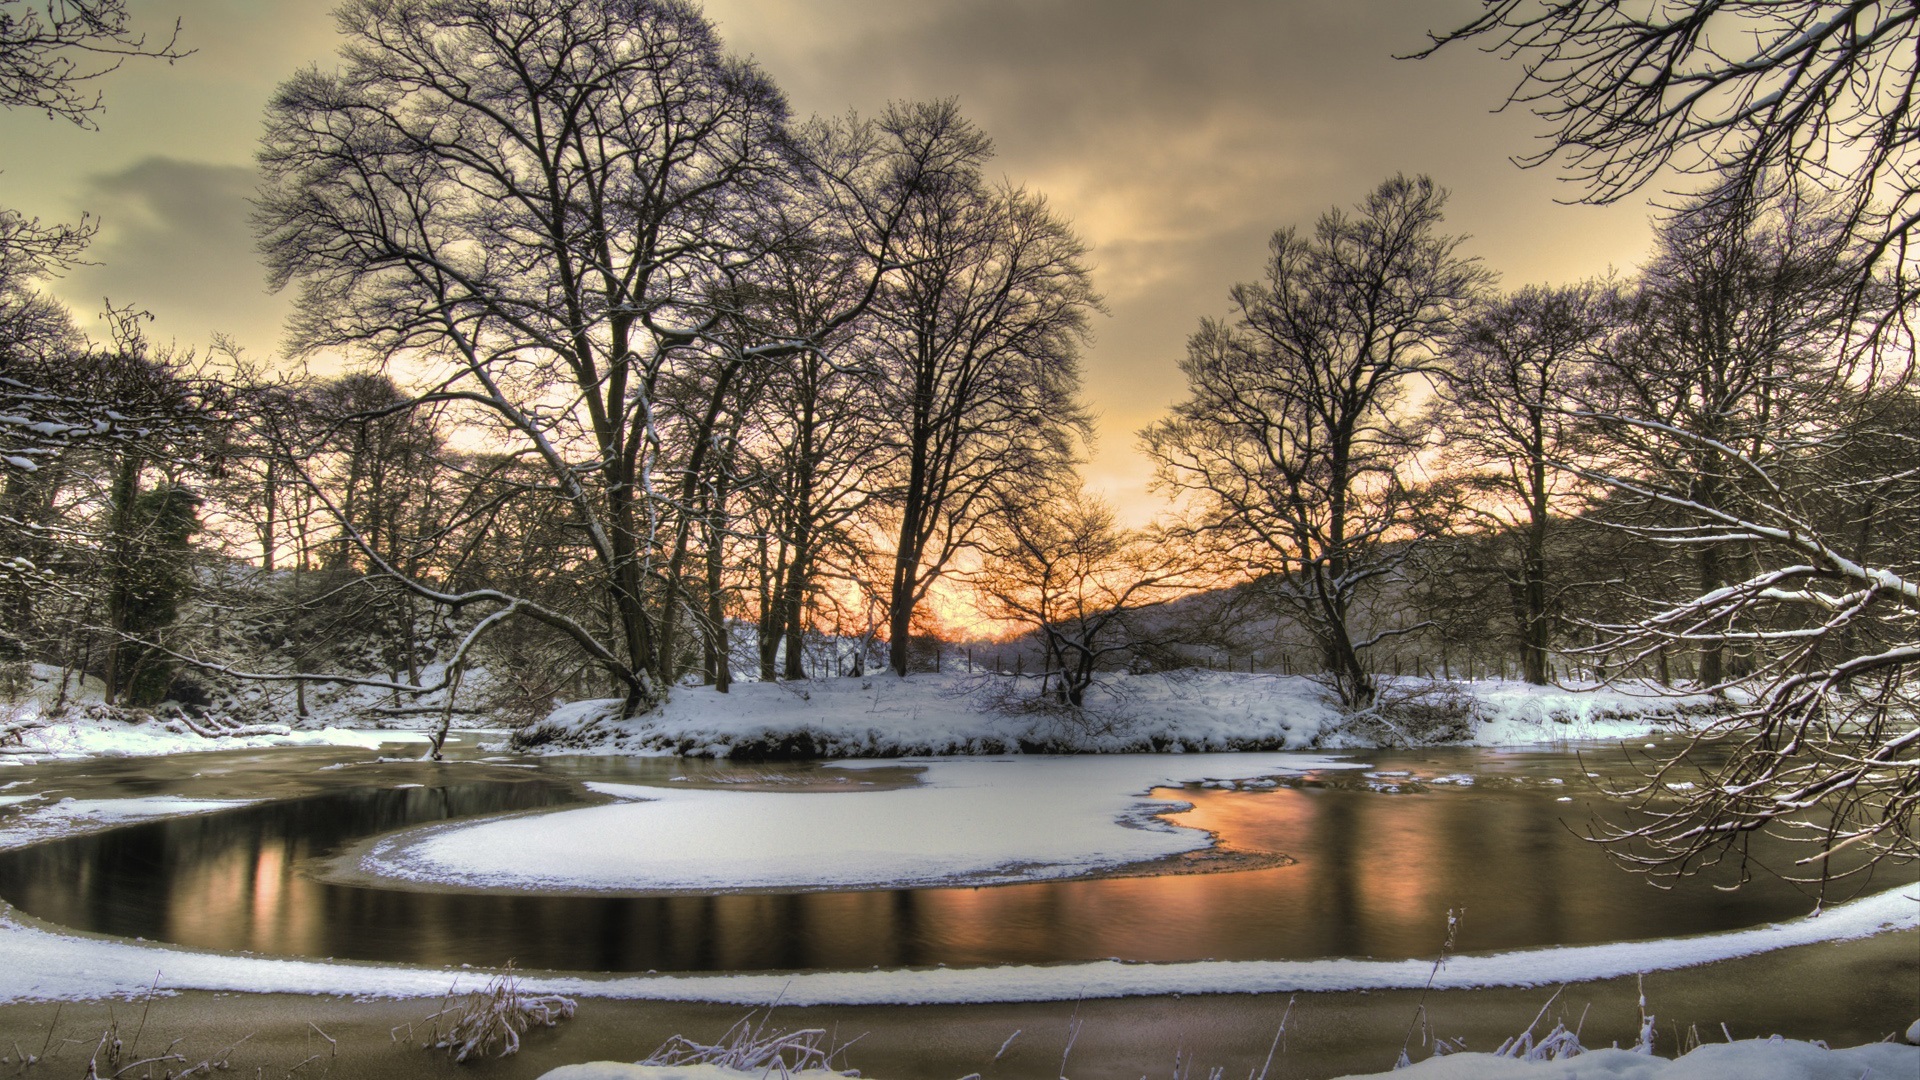 Wallpapers Winter snow, nature landscape, river, trees, dusk 1920x1080 Full HD 2K Picture, Image